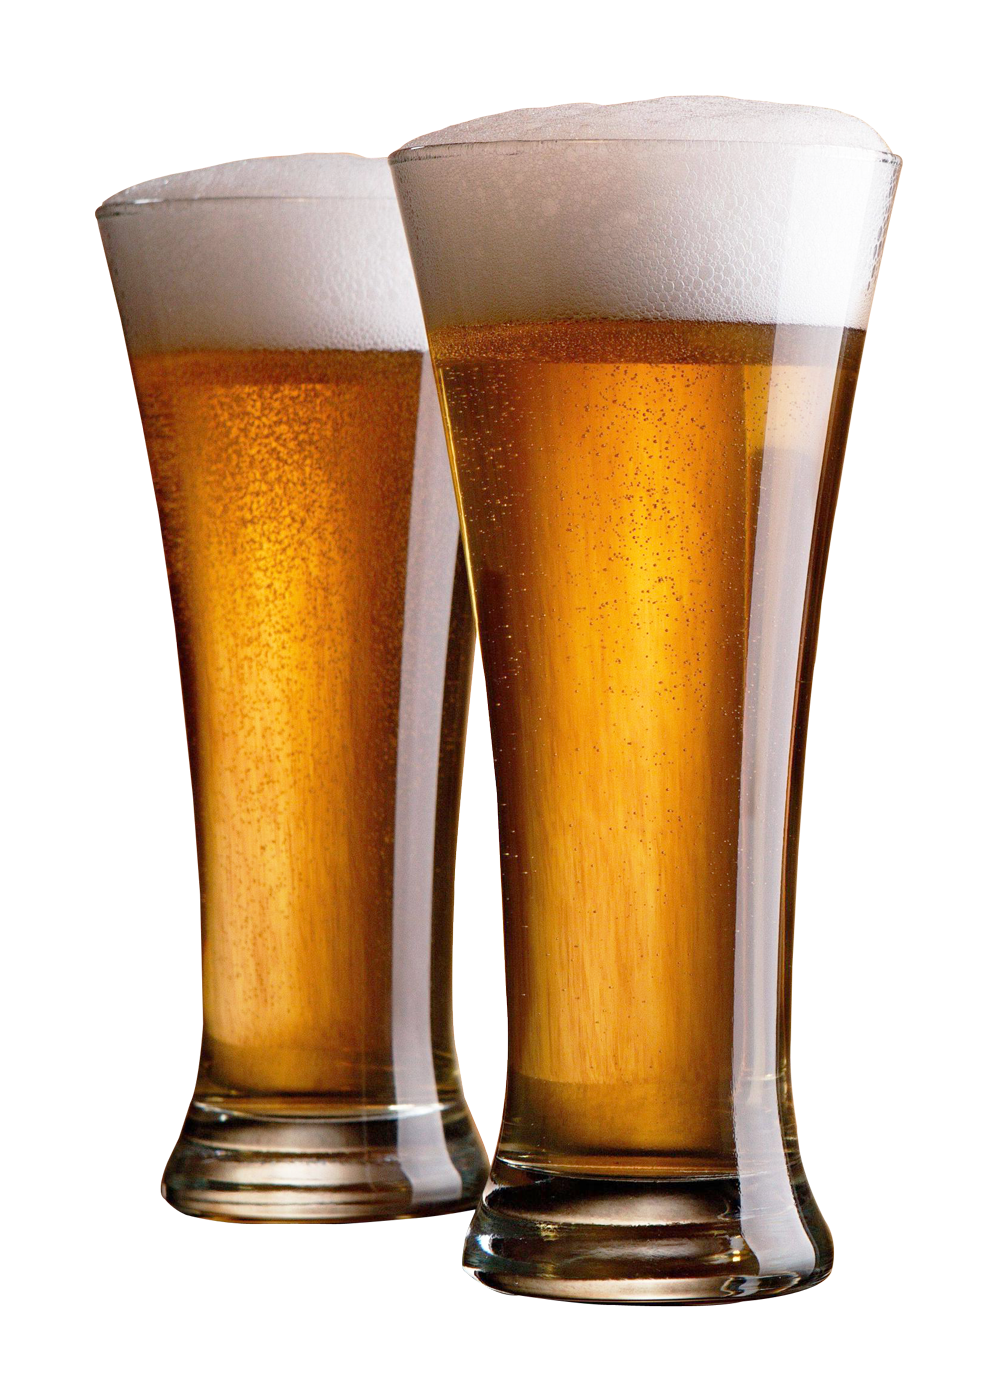 Download Beer Glasses PNG Image for Free.